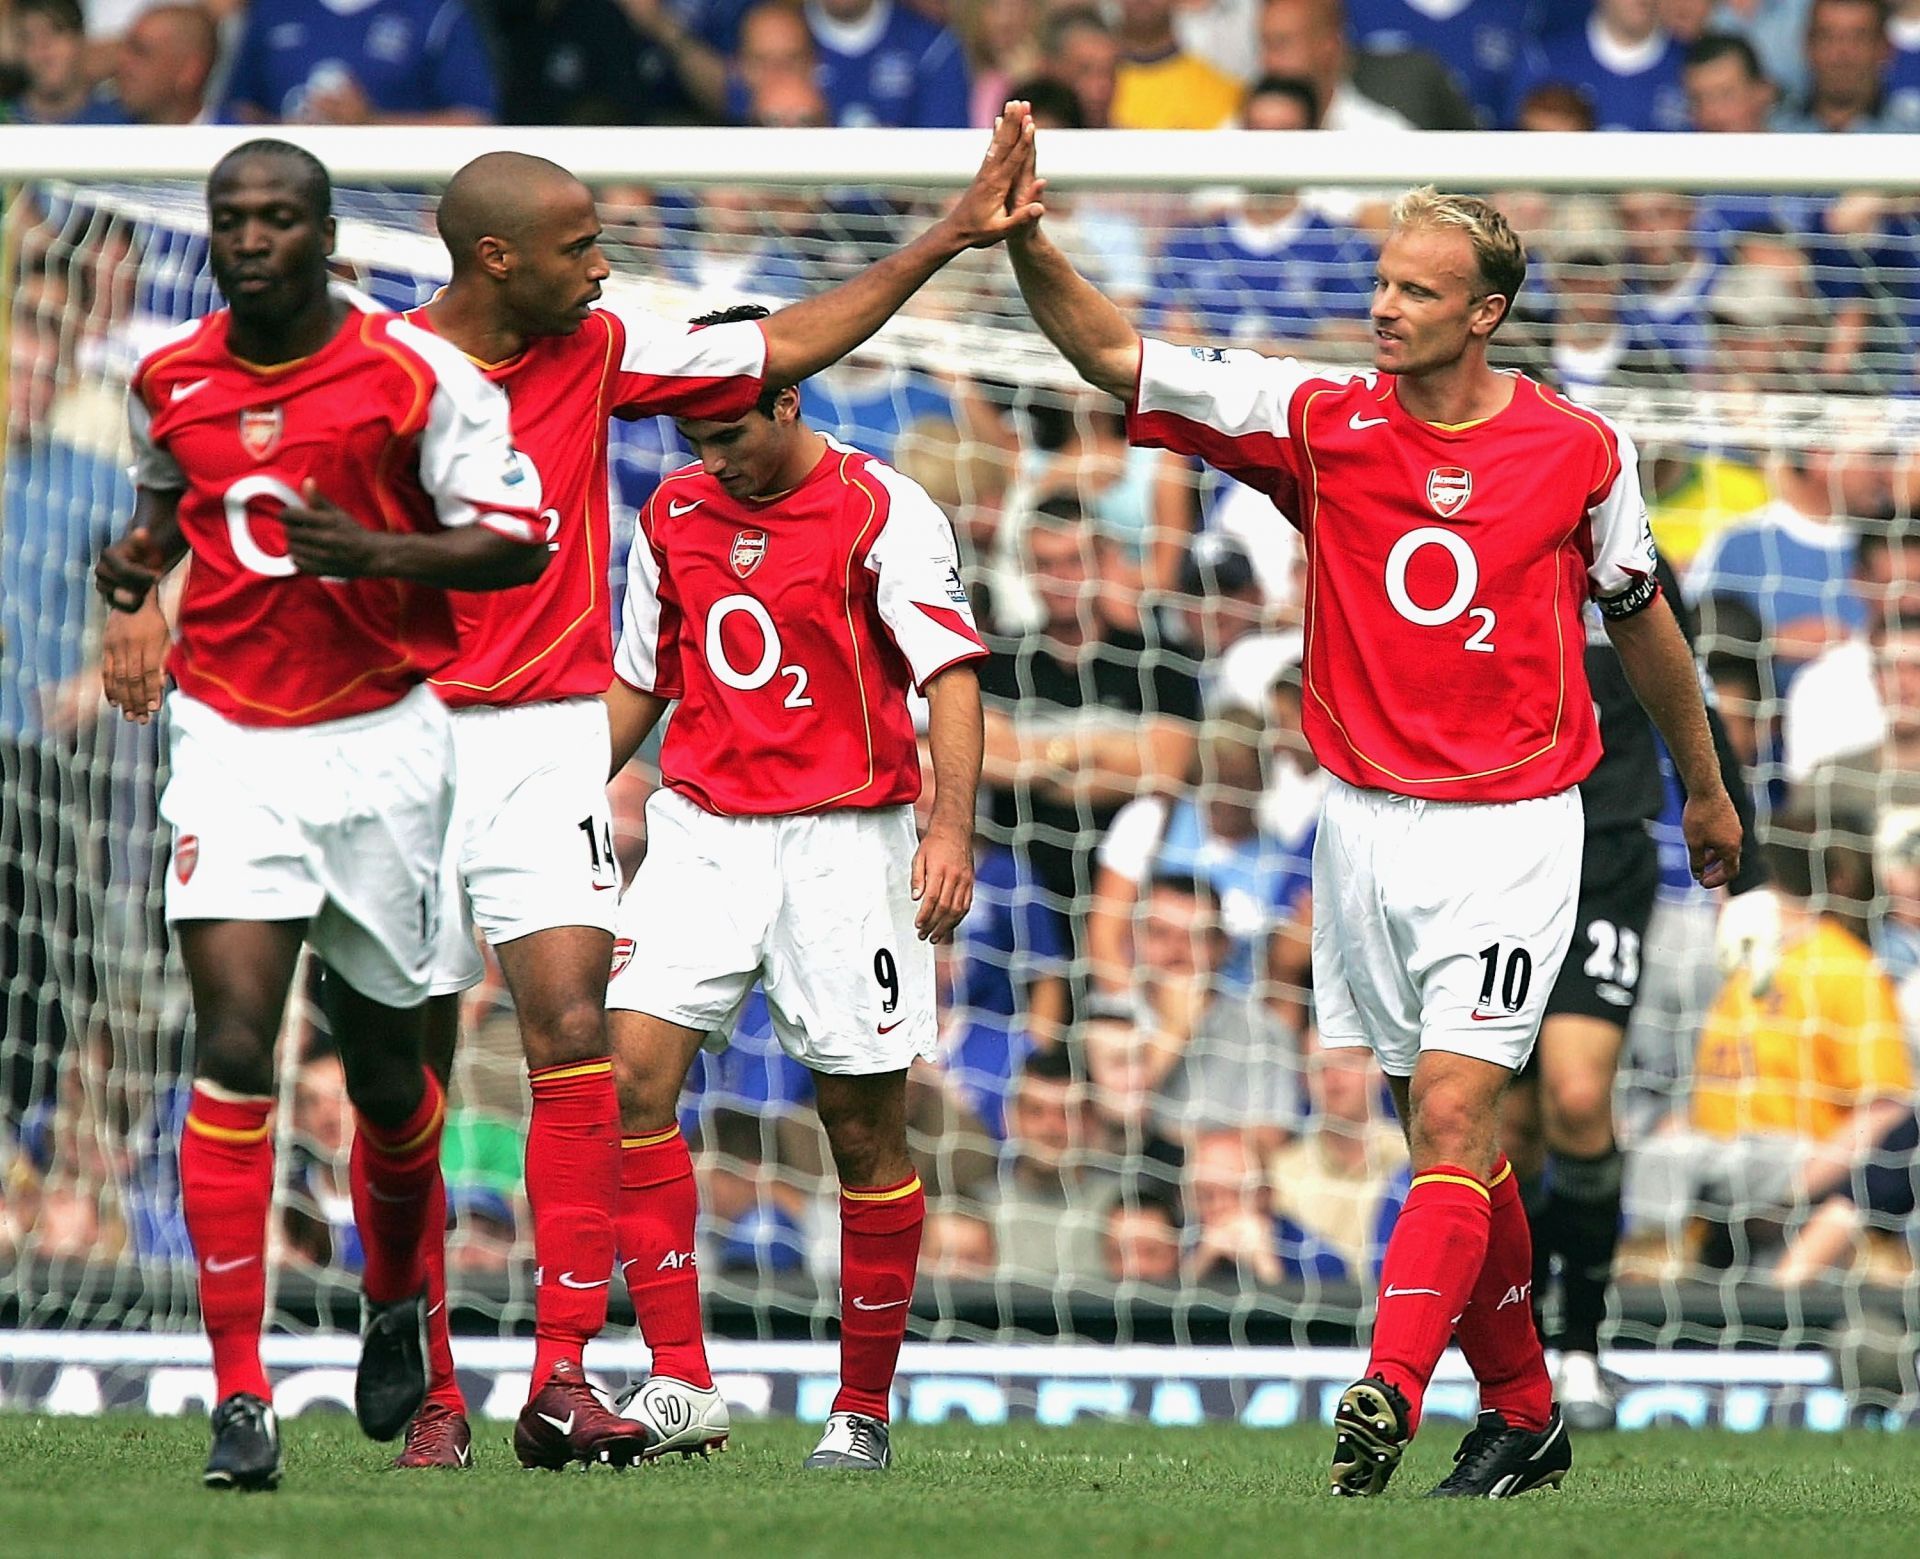 Arsenal were the team to beat in the first decade of the 21st century